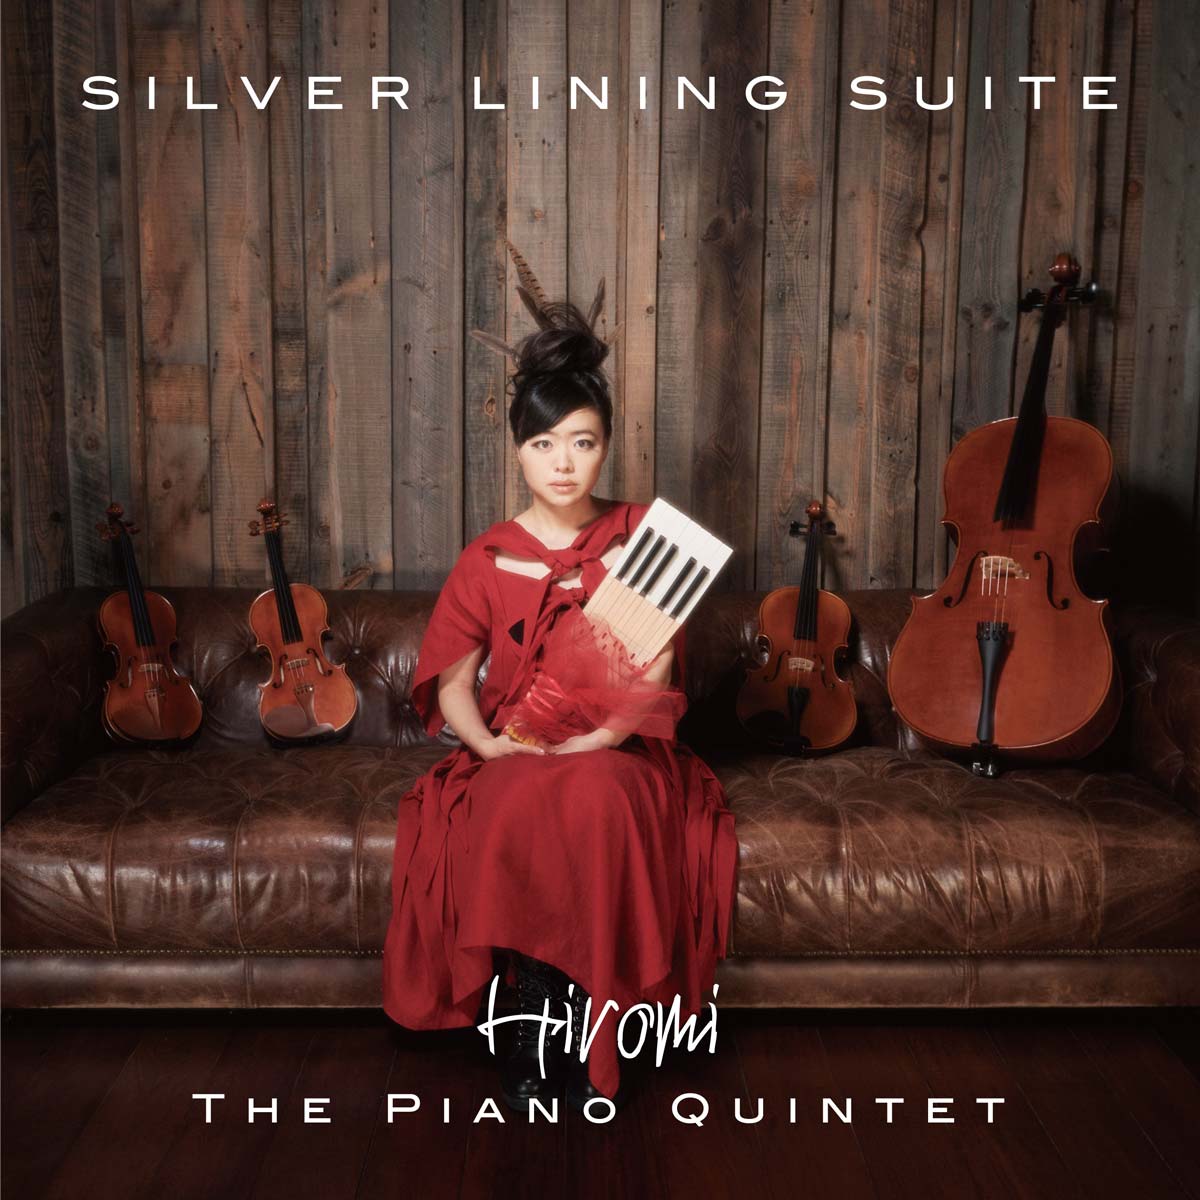 Featured image for “HIROMI’S SILVER LINING SUITE, DUE OUT OCTOBER 8 ON TELARC, IS A BREATHTAKING BLEND OF JAZZ INVENTION AND CLASSICAL COMPOSITION”